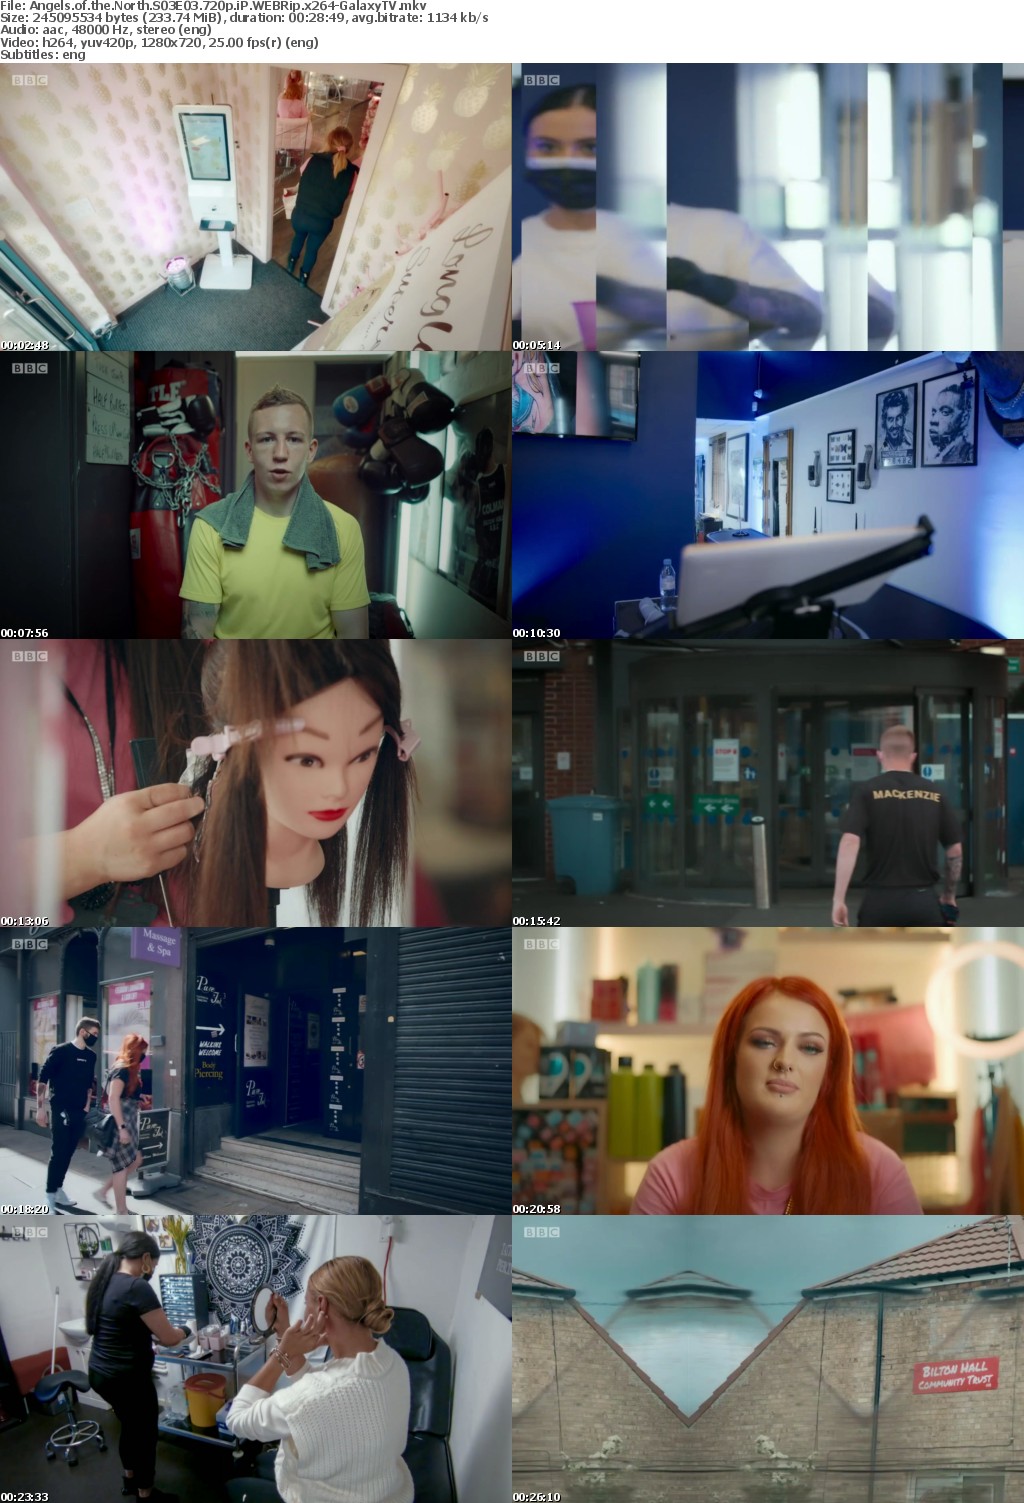 Angels of the North S03 COMPLETE 720p iP WEBRip x264-GalaxyTV